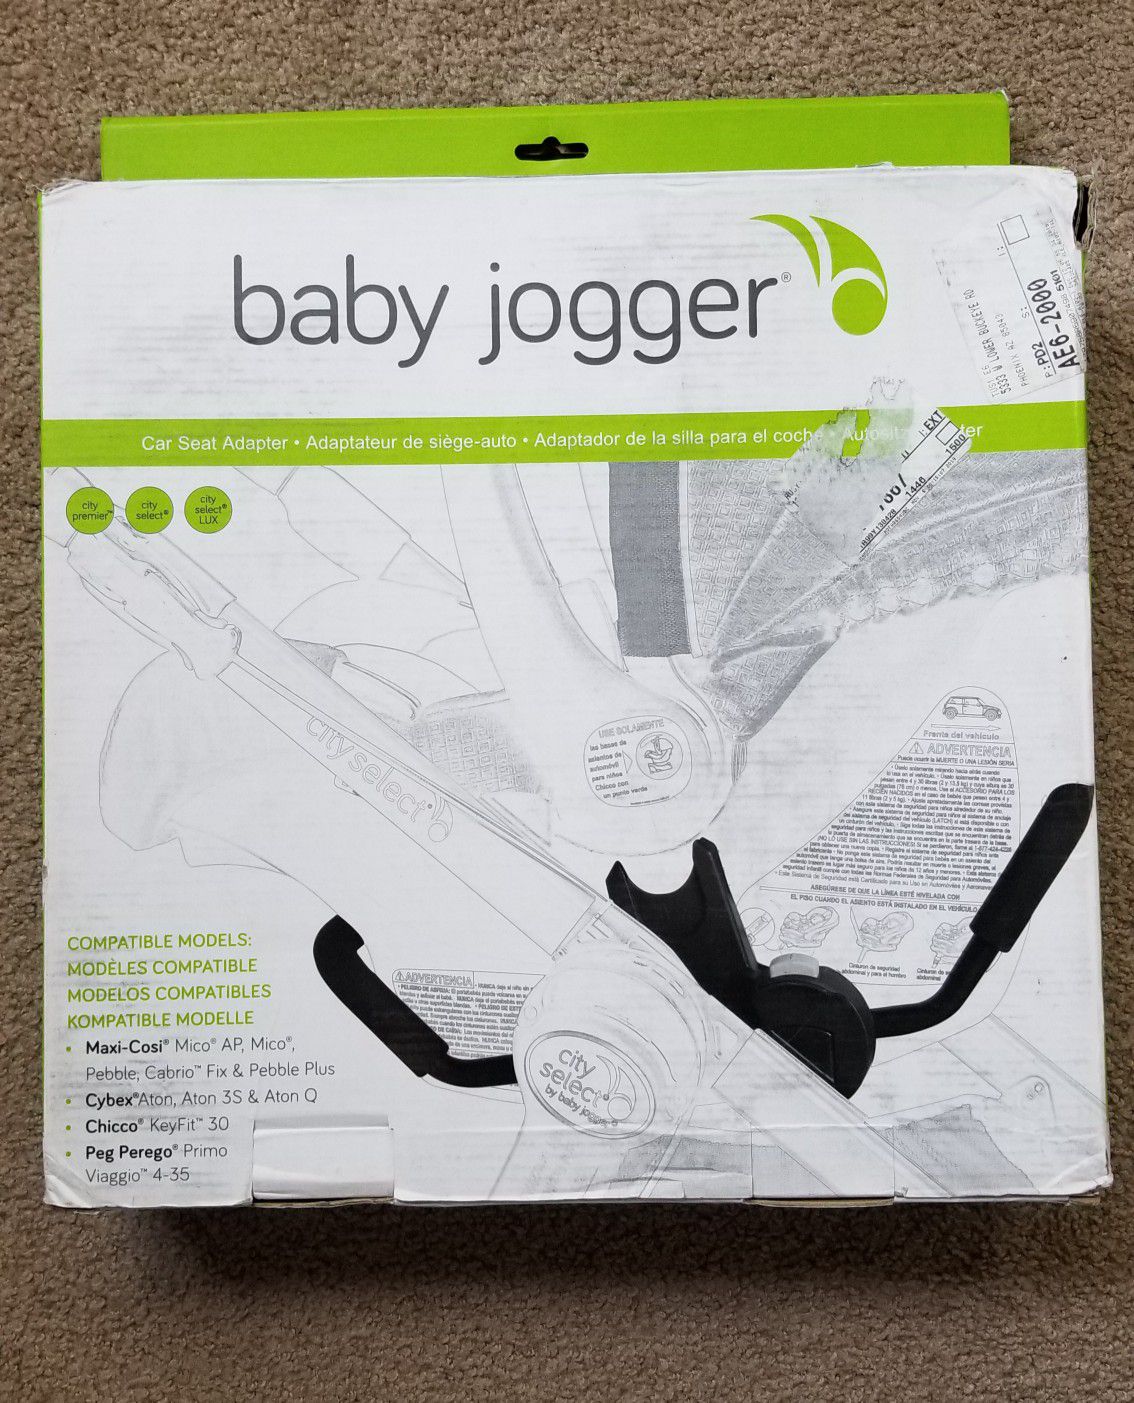 Baby jogger car seat adapter for City Premier/City Select/City Select LUX